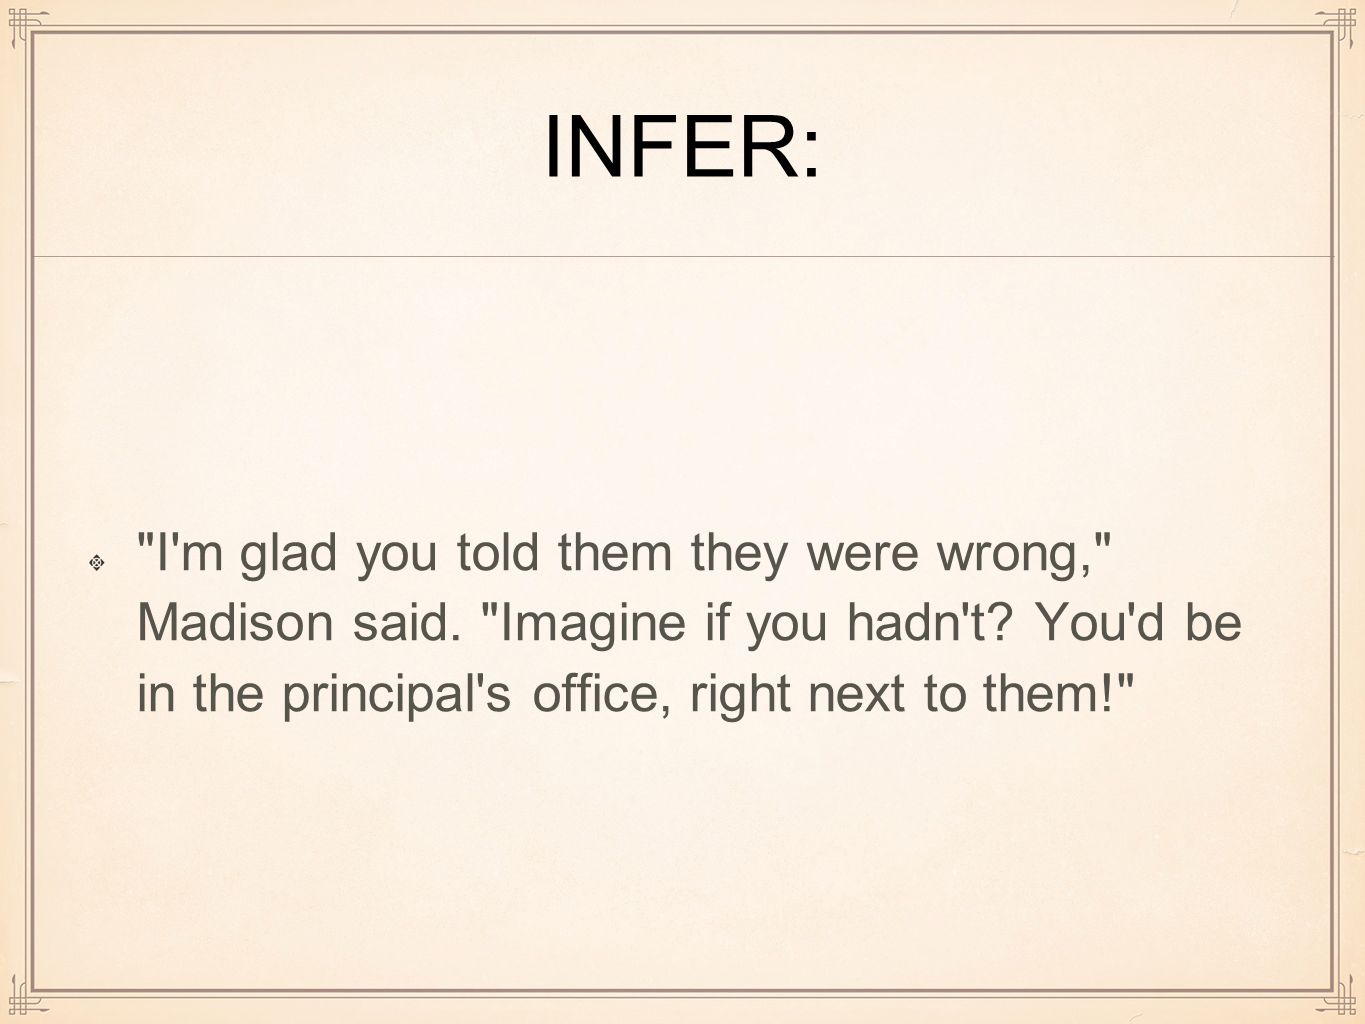 INFER: I m glad you told them they were wrong, Madison said.